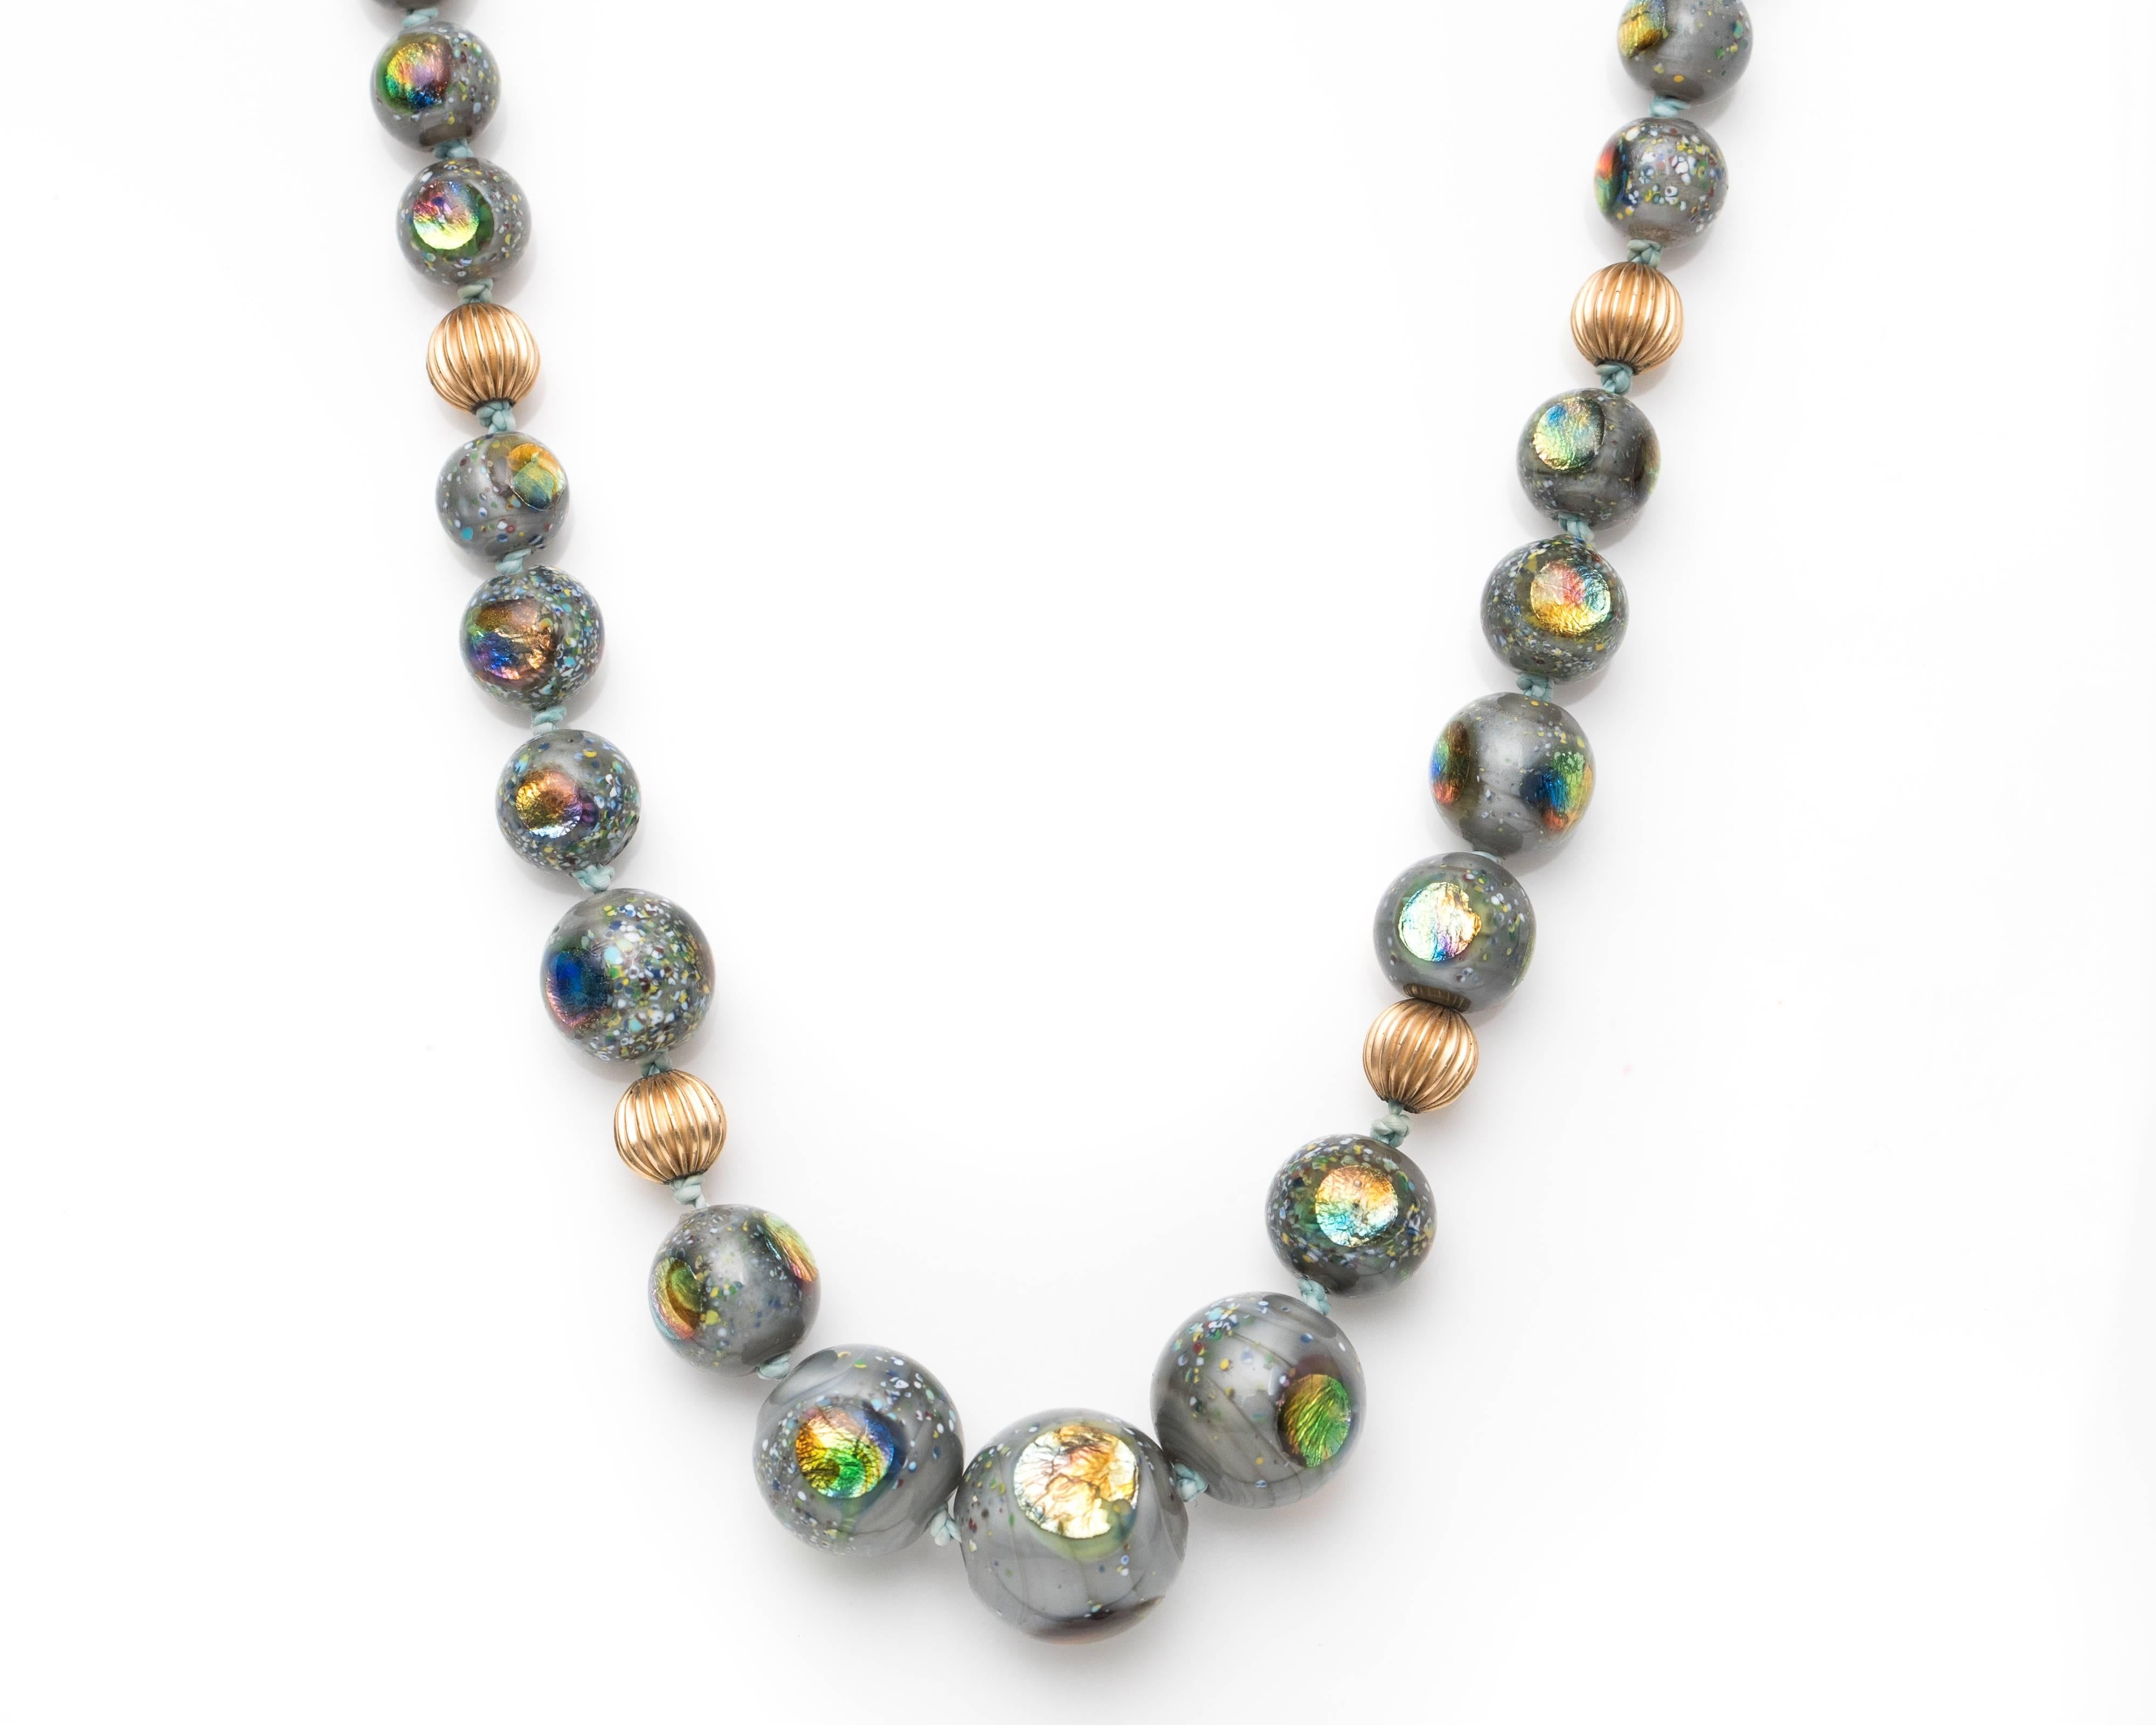 1960s Retro Ammolite Inlaid Glass and 14 Karat Yellow Gold Bead Necklace. Features Glass Beads in graduated diameters from 6.4 millimeters to 16 millimeters. Each glass bead is Inlaid with colorful, iridescent Ammolite. The Ammolite adds a rainbow